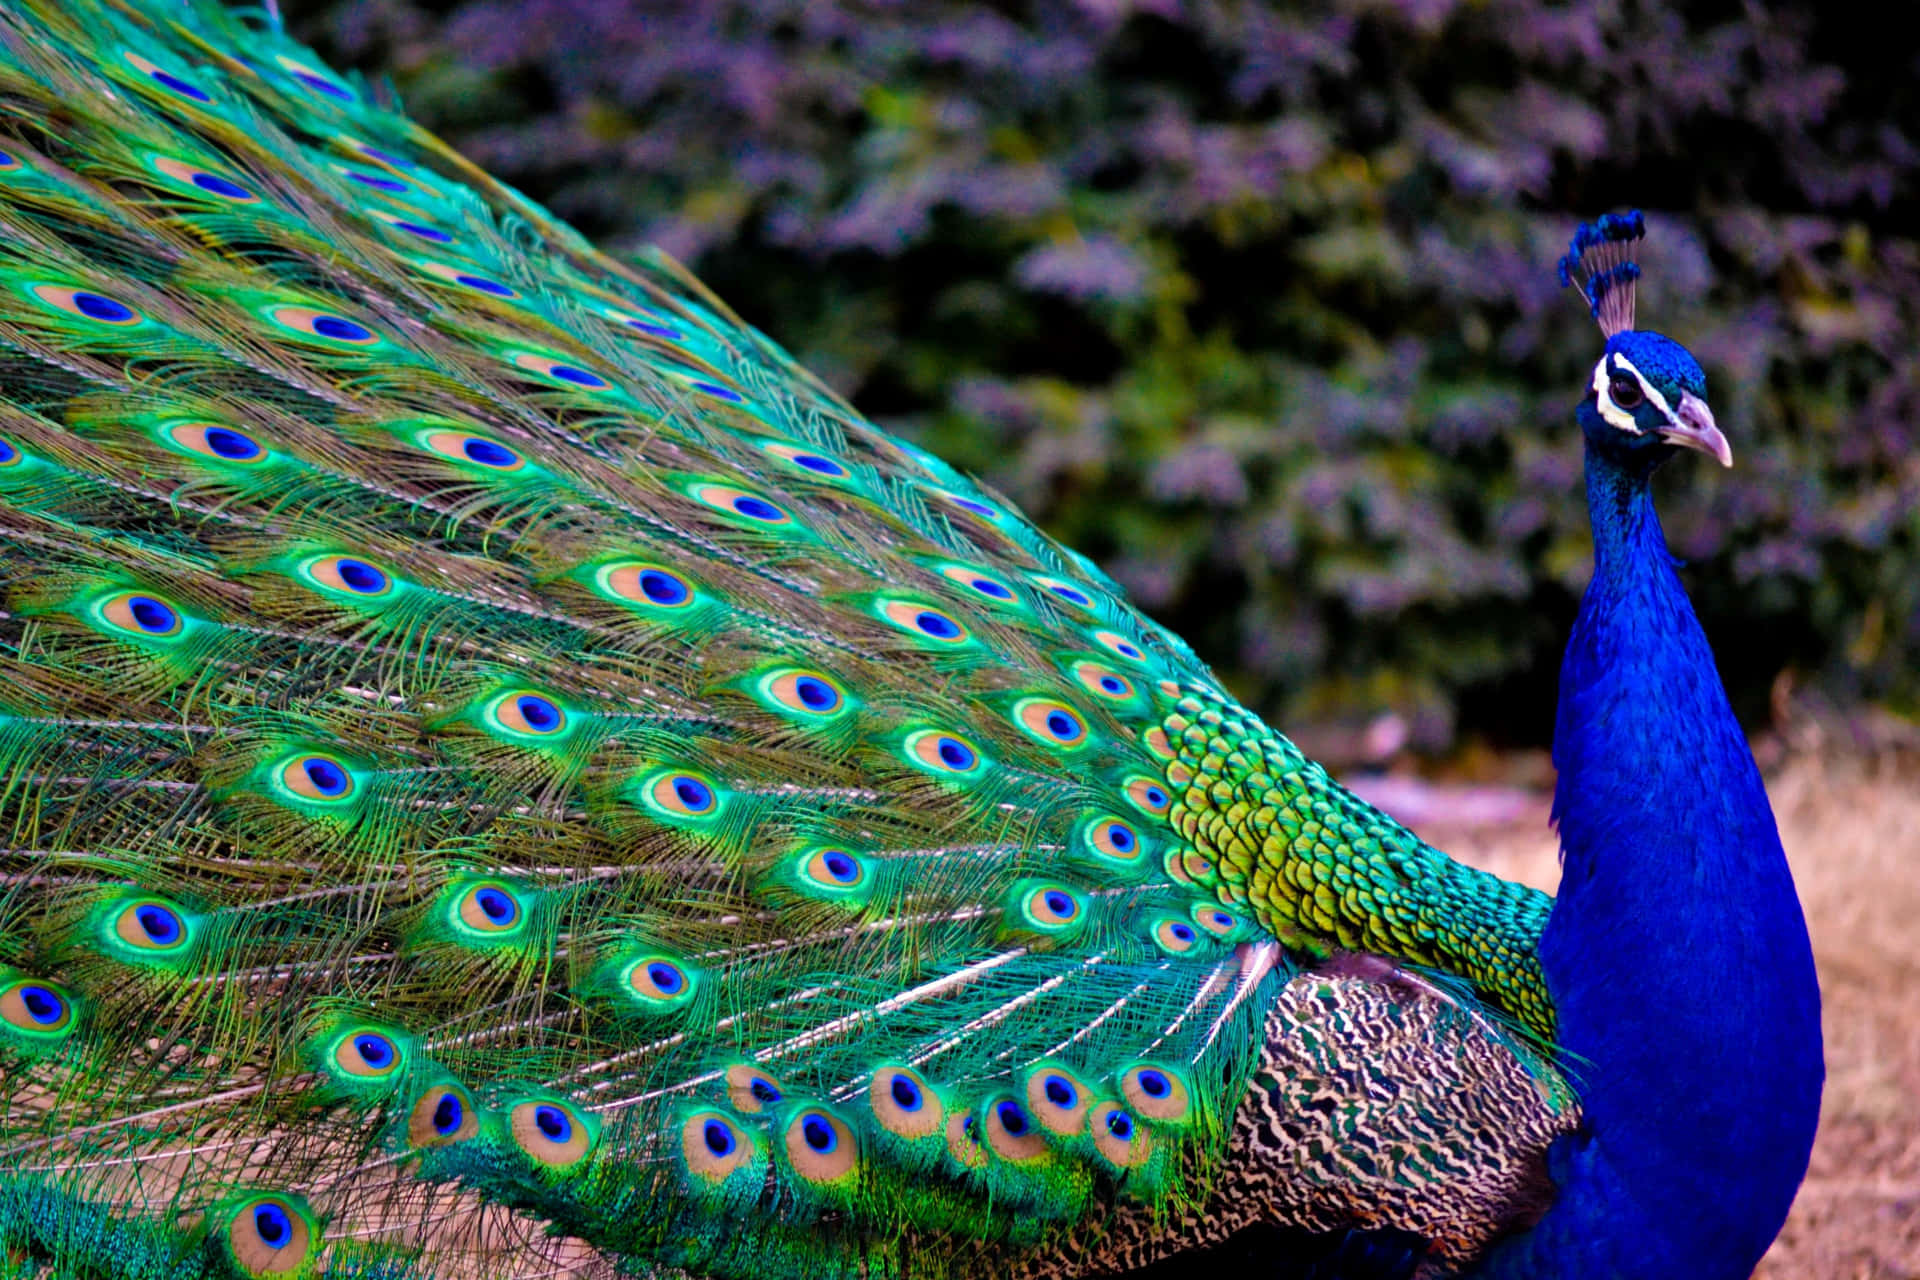 Vibrant Peacock Displaying Its Tail Plumage